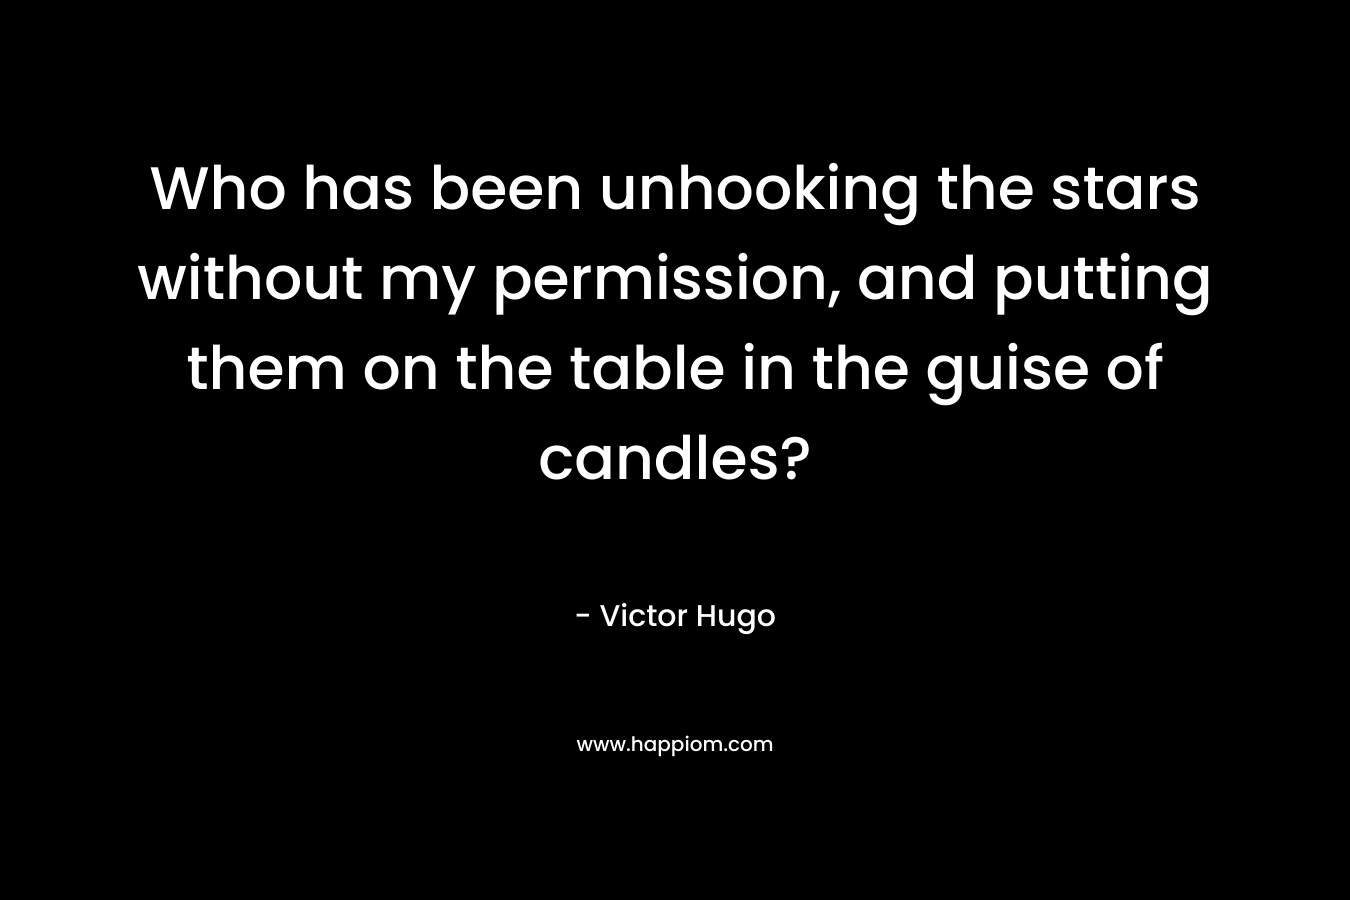 Who has been unhooking the stars without my permission, and putting them on the table in the guise of candles? – Victor Hugo